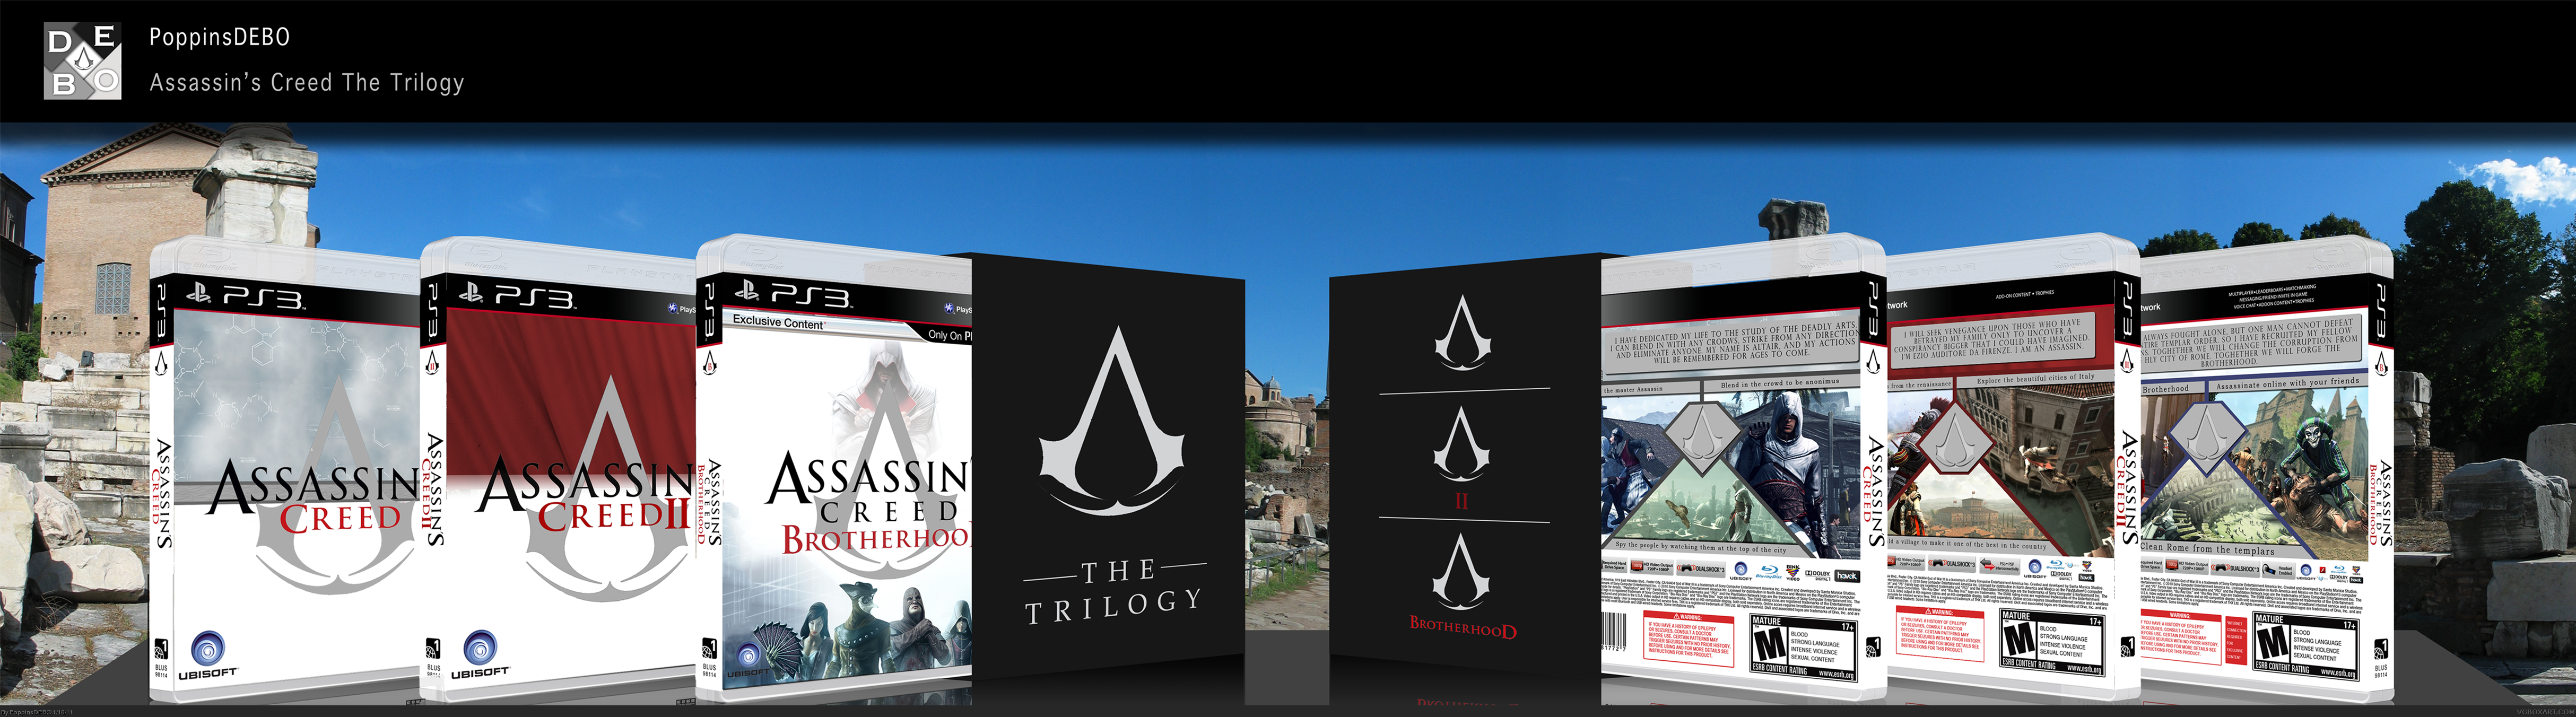 Assassins Creed: The Trilogy box cover